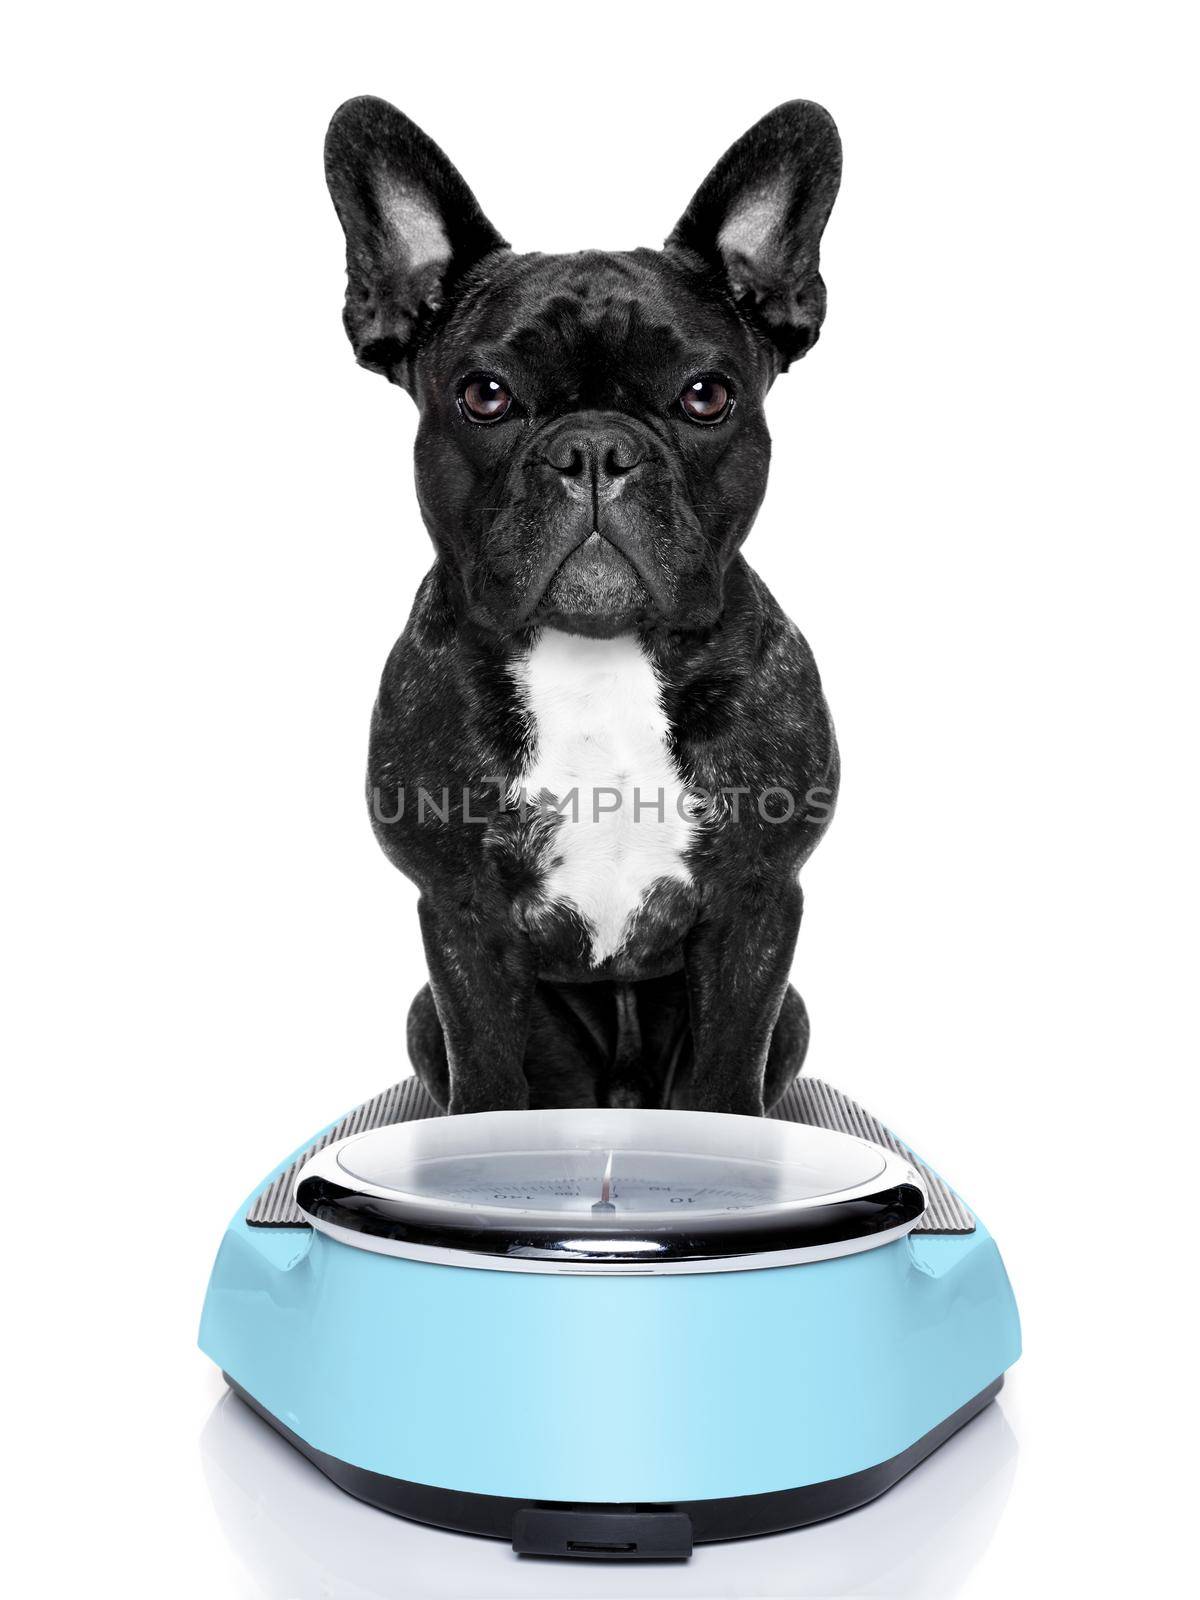 healthy dog on scale wondering about weightloss and how to solve this problem, isolated on white background